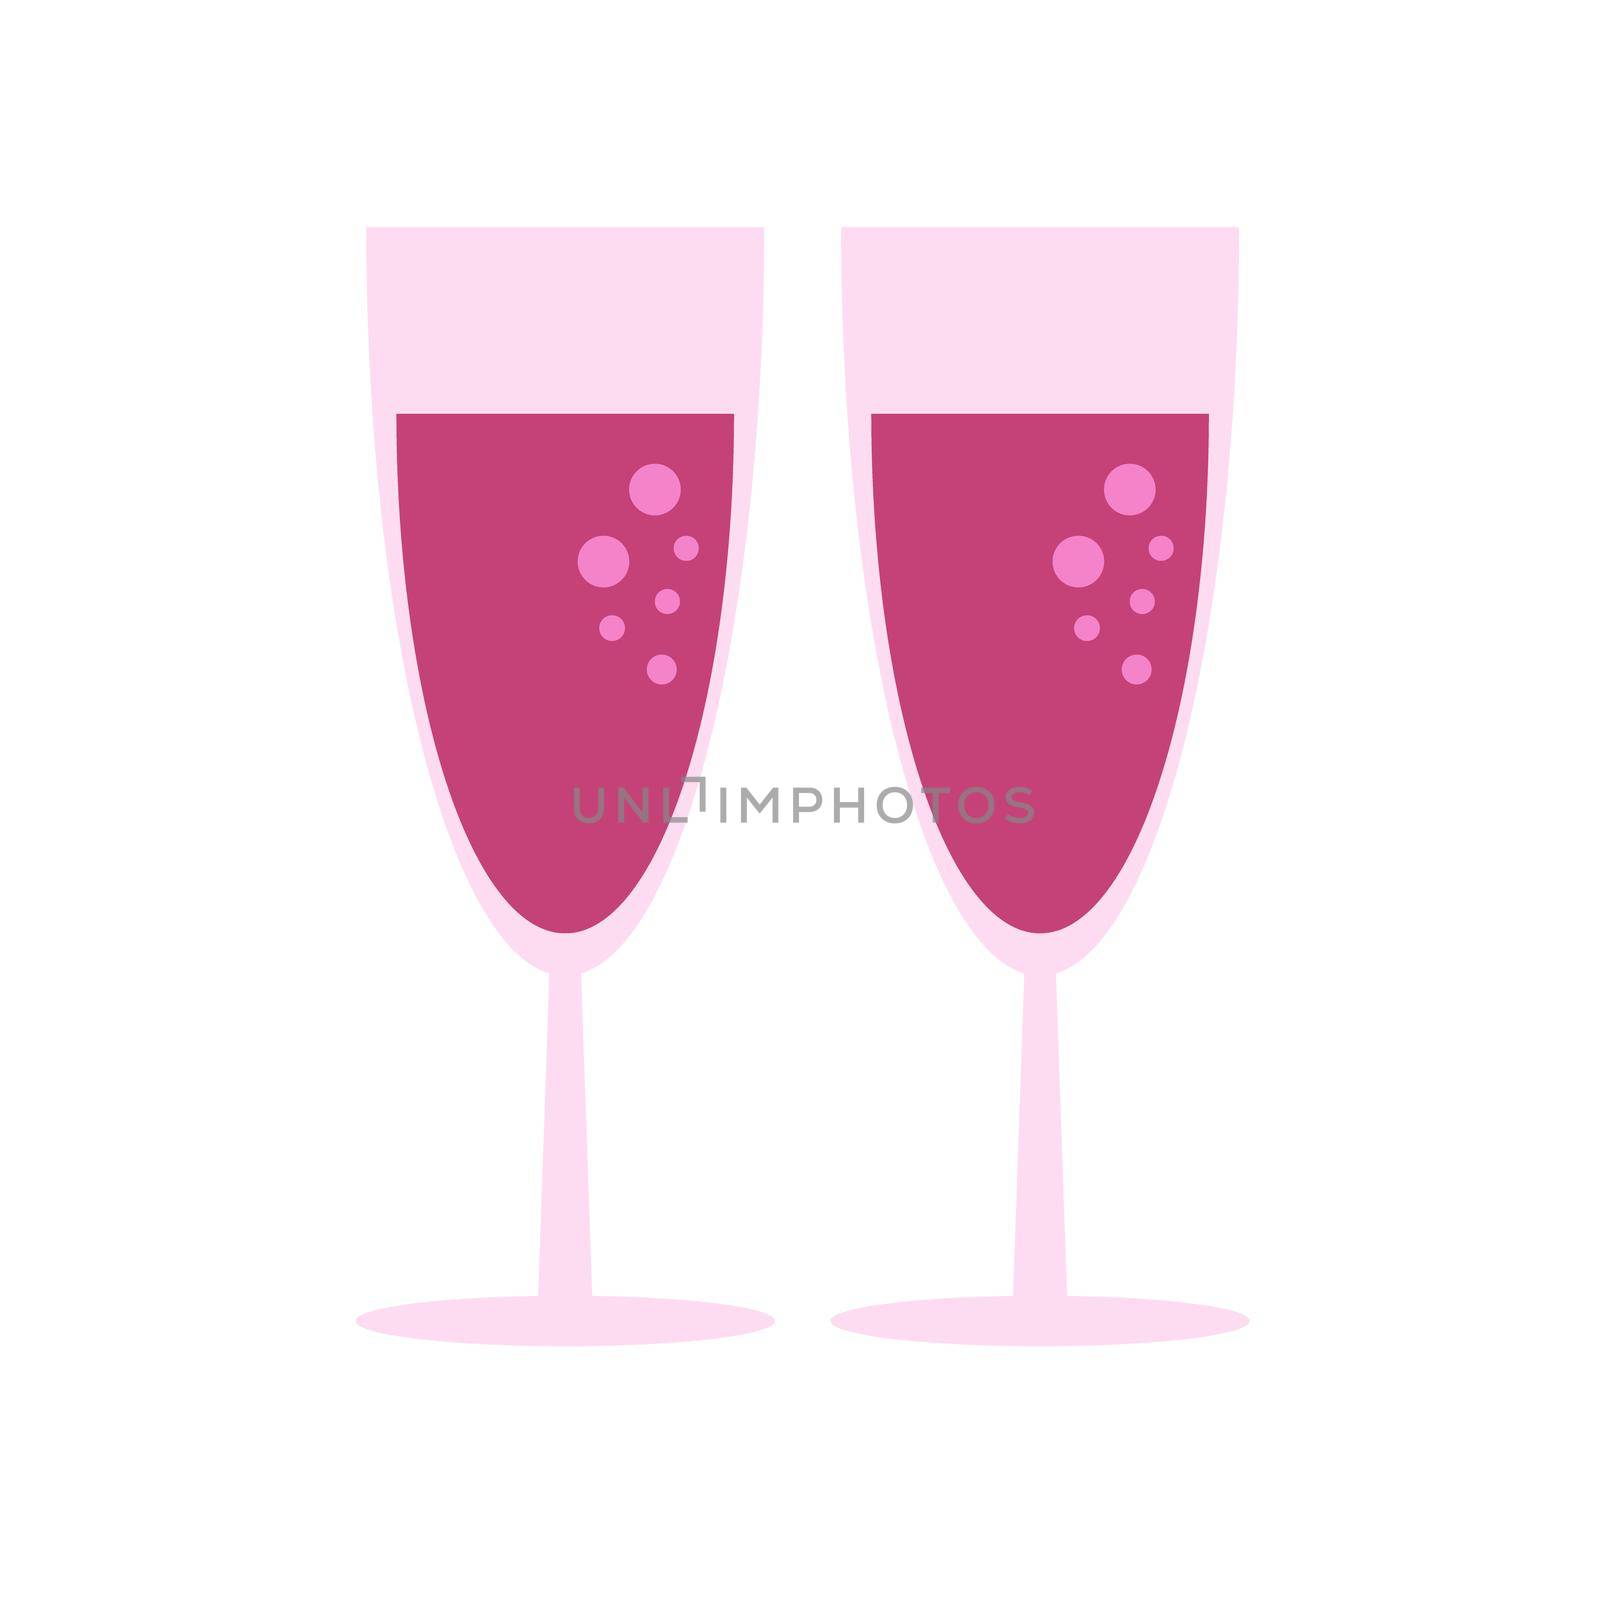 Two glasses of pink champagne or wine. Vector image in flat style. Valentines day greeting card. Elements on white